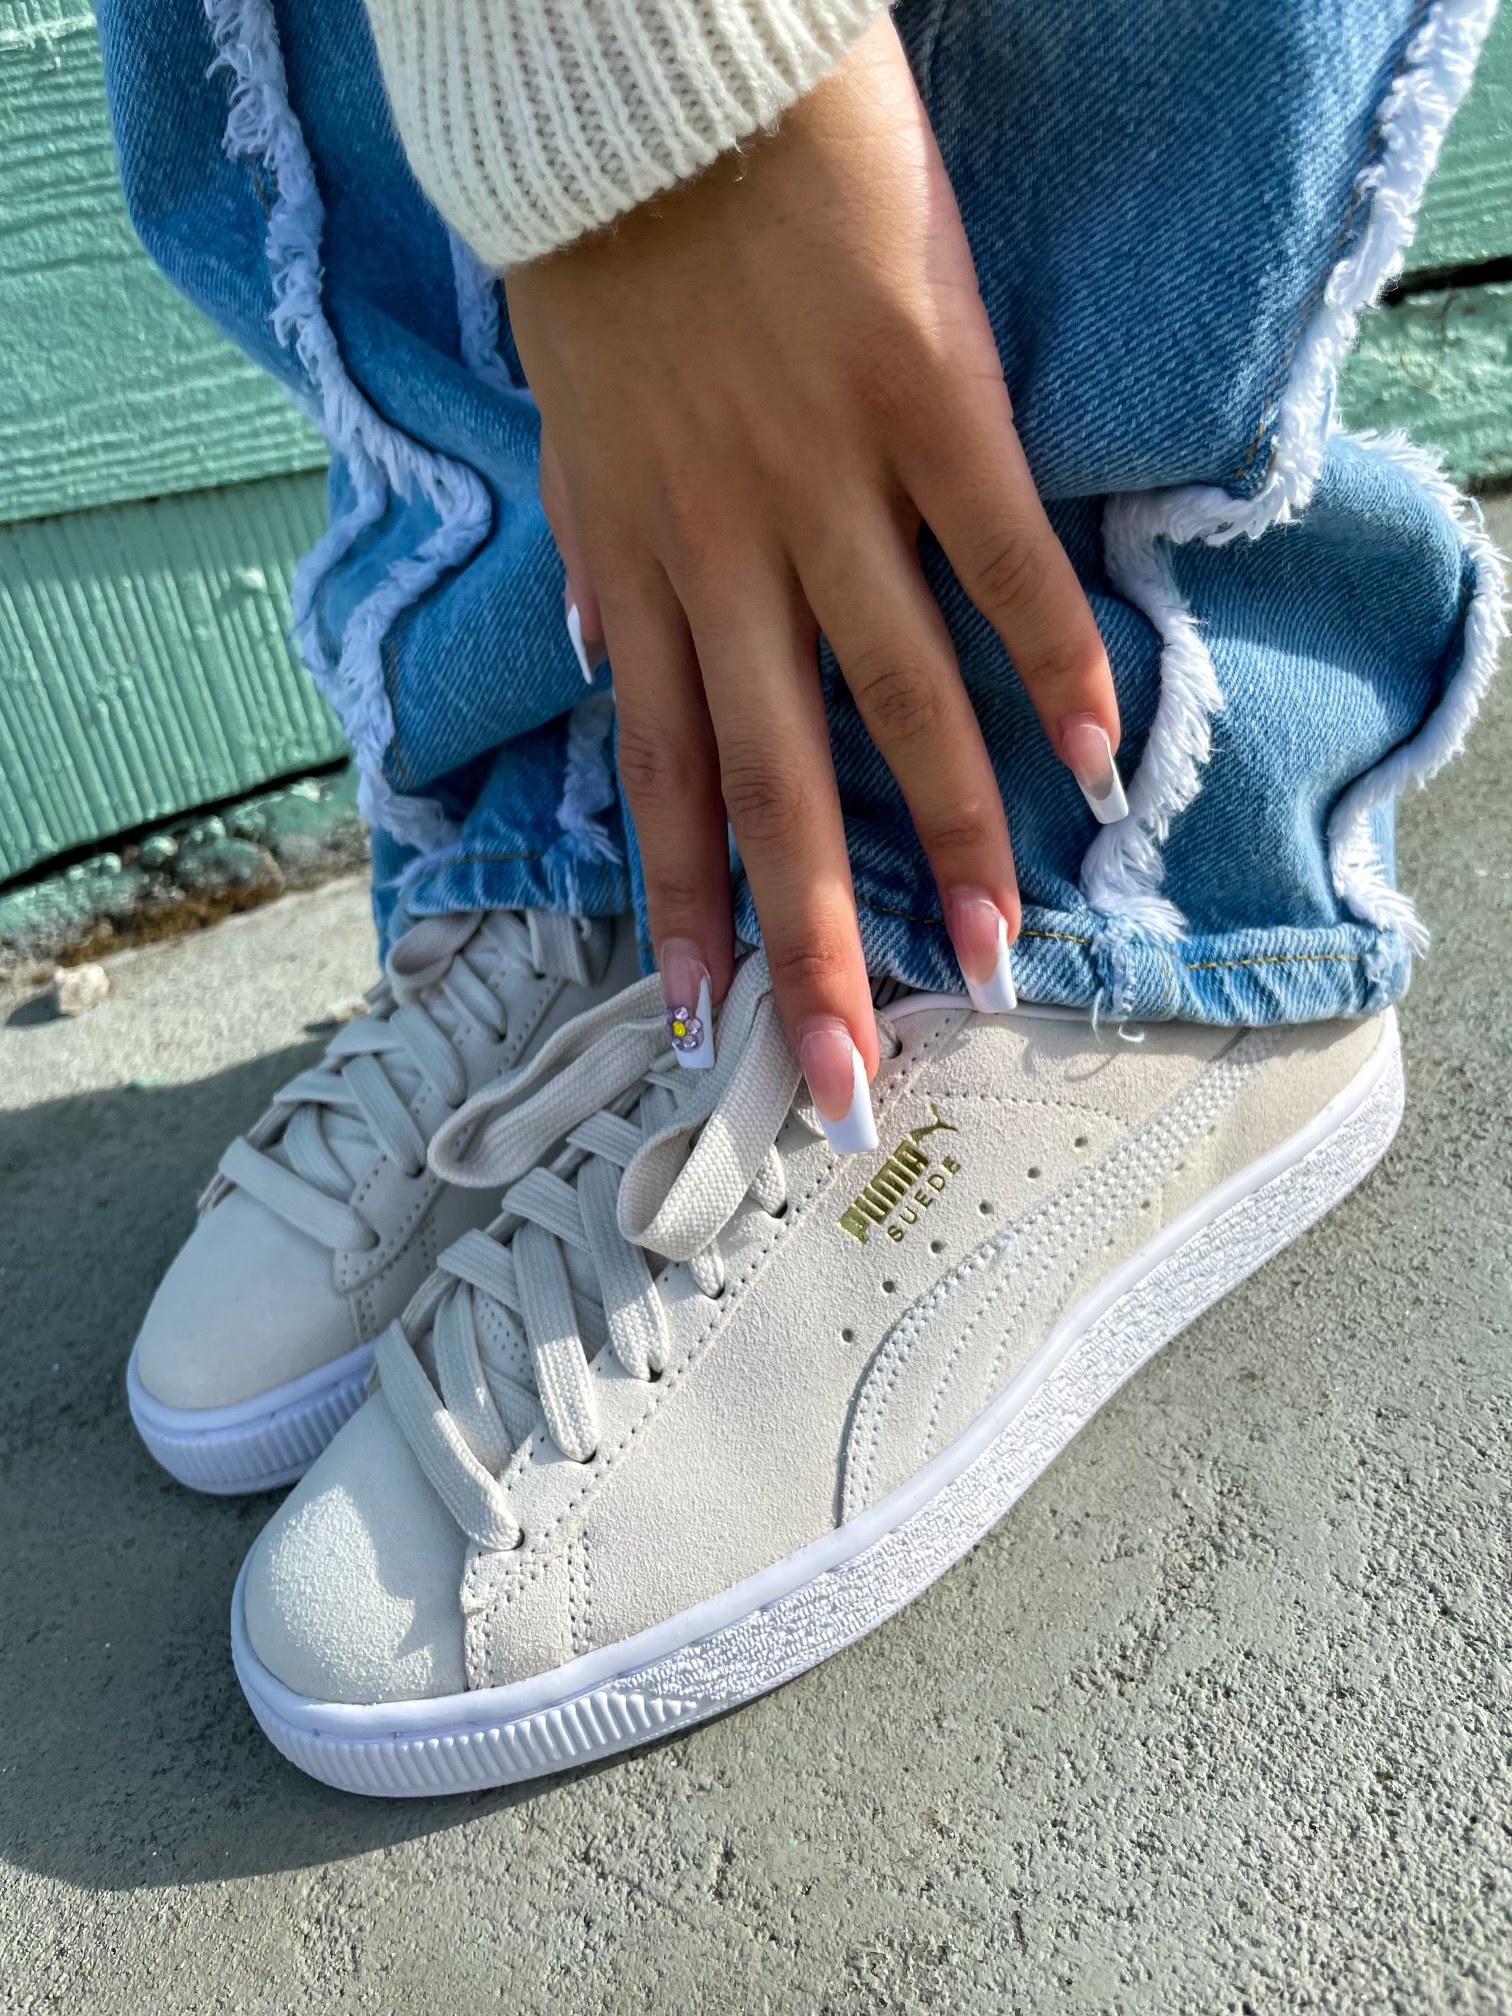 Influencer JasmineCorly&#x27;s hand is posed atop her Puma Suede sneakers